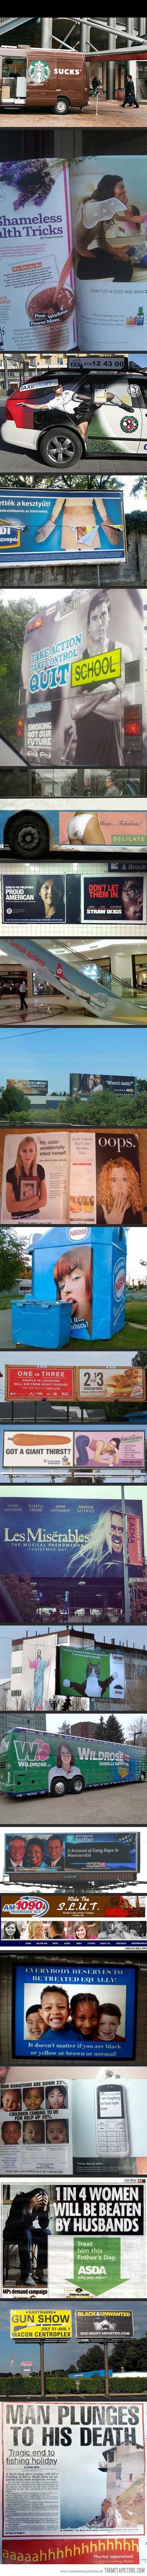 23 Terrible Advertising Placements…lol